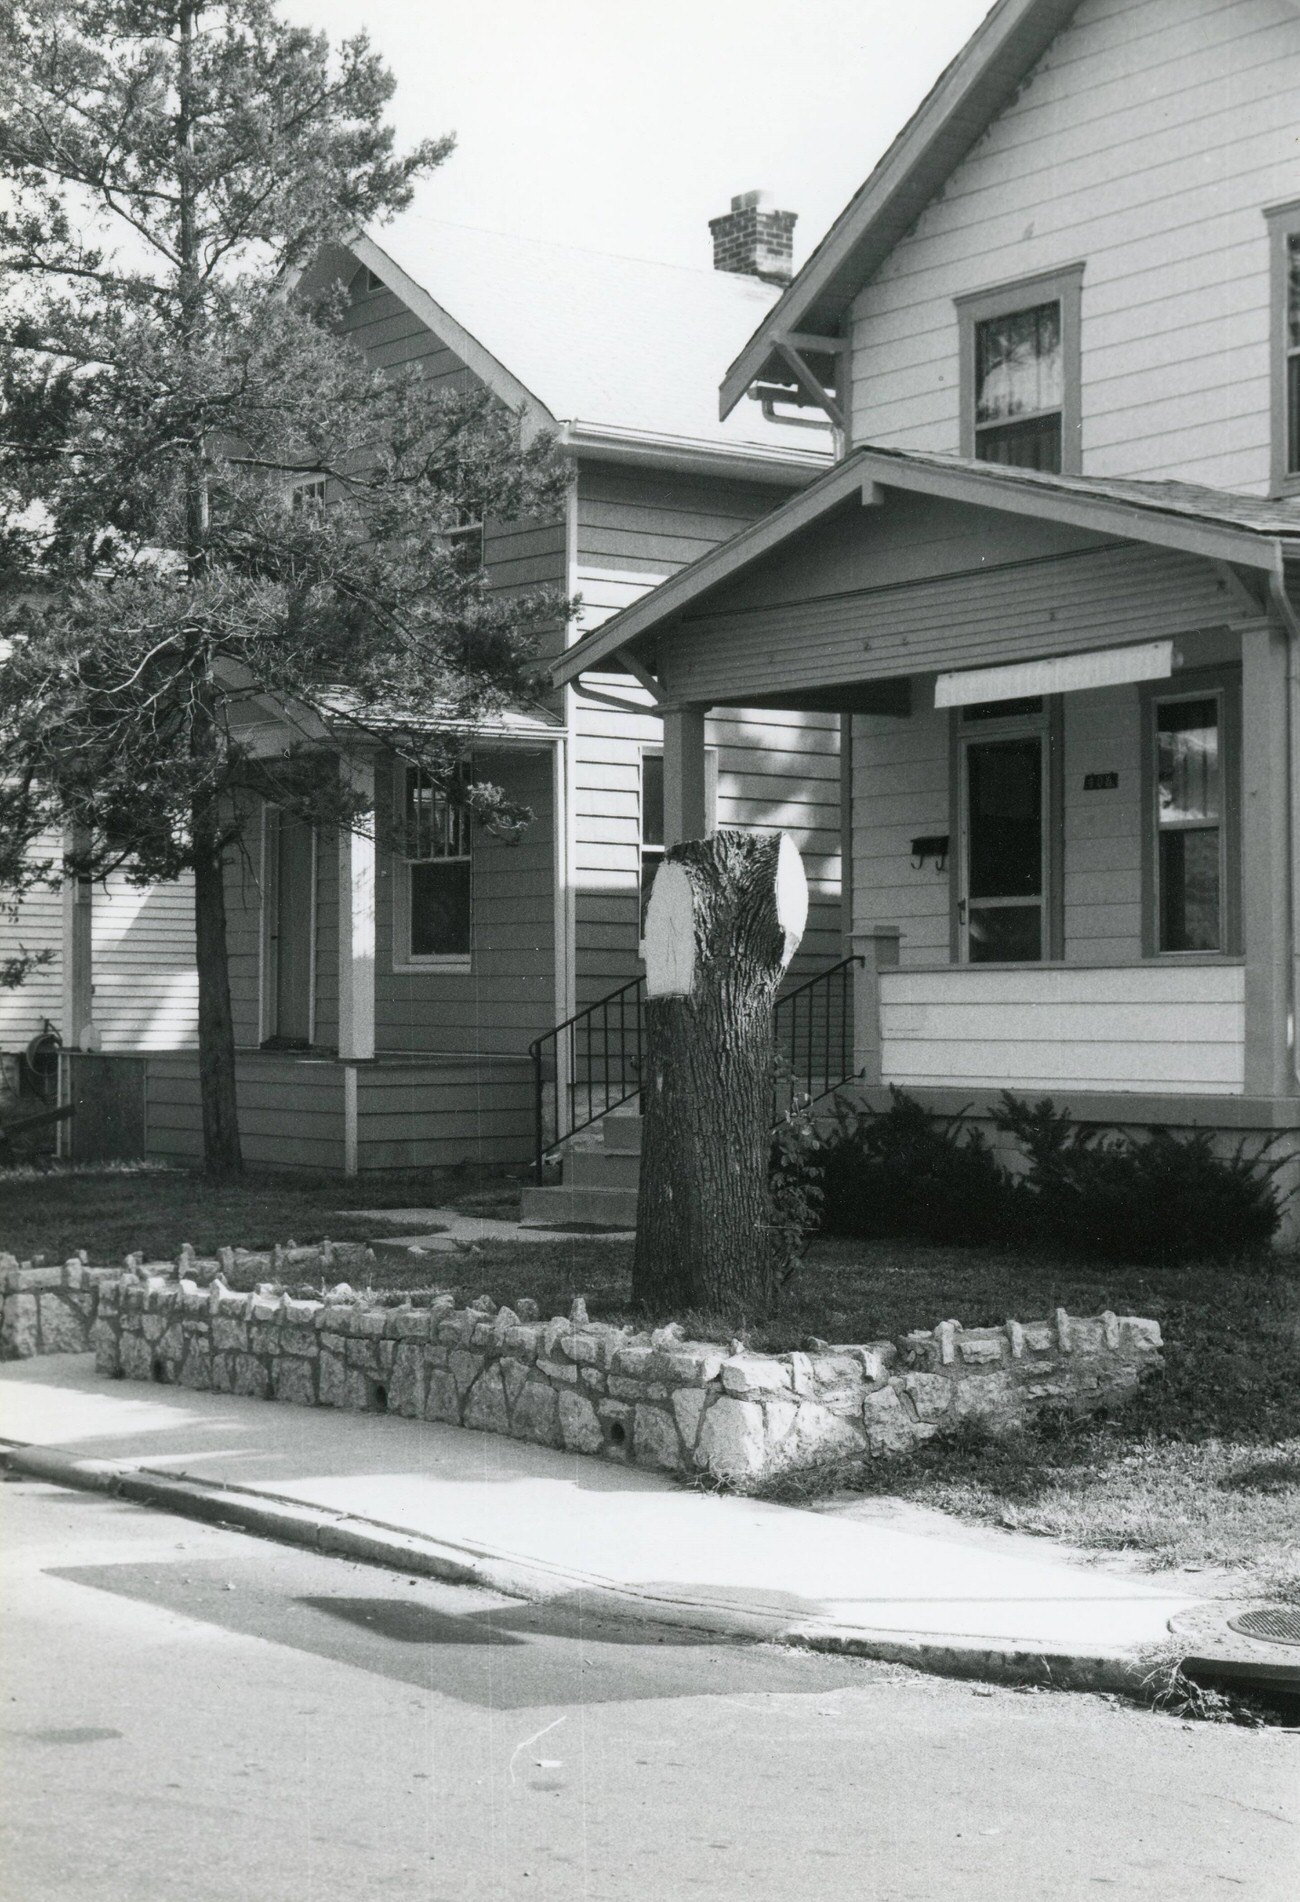 406 South Warren Avenue in Hilltop, featured in the Greater Hilltop Area Commission's guide, 1980s.